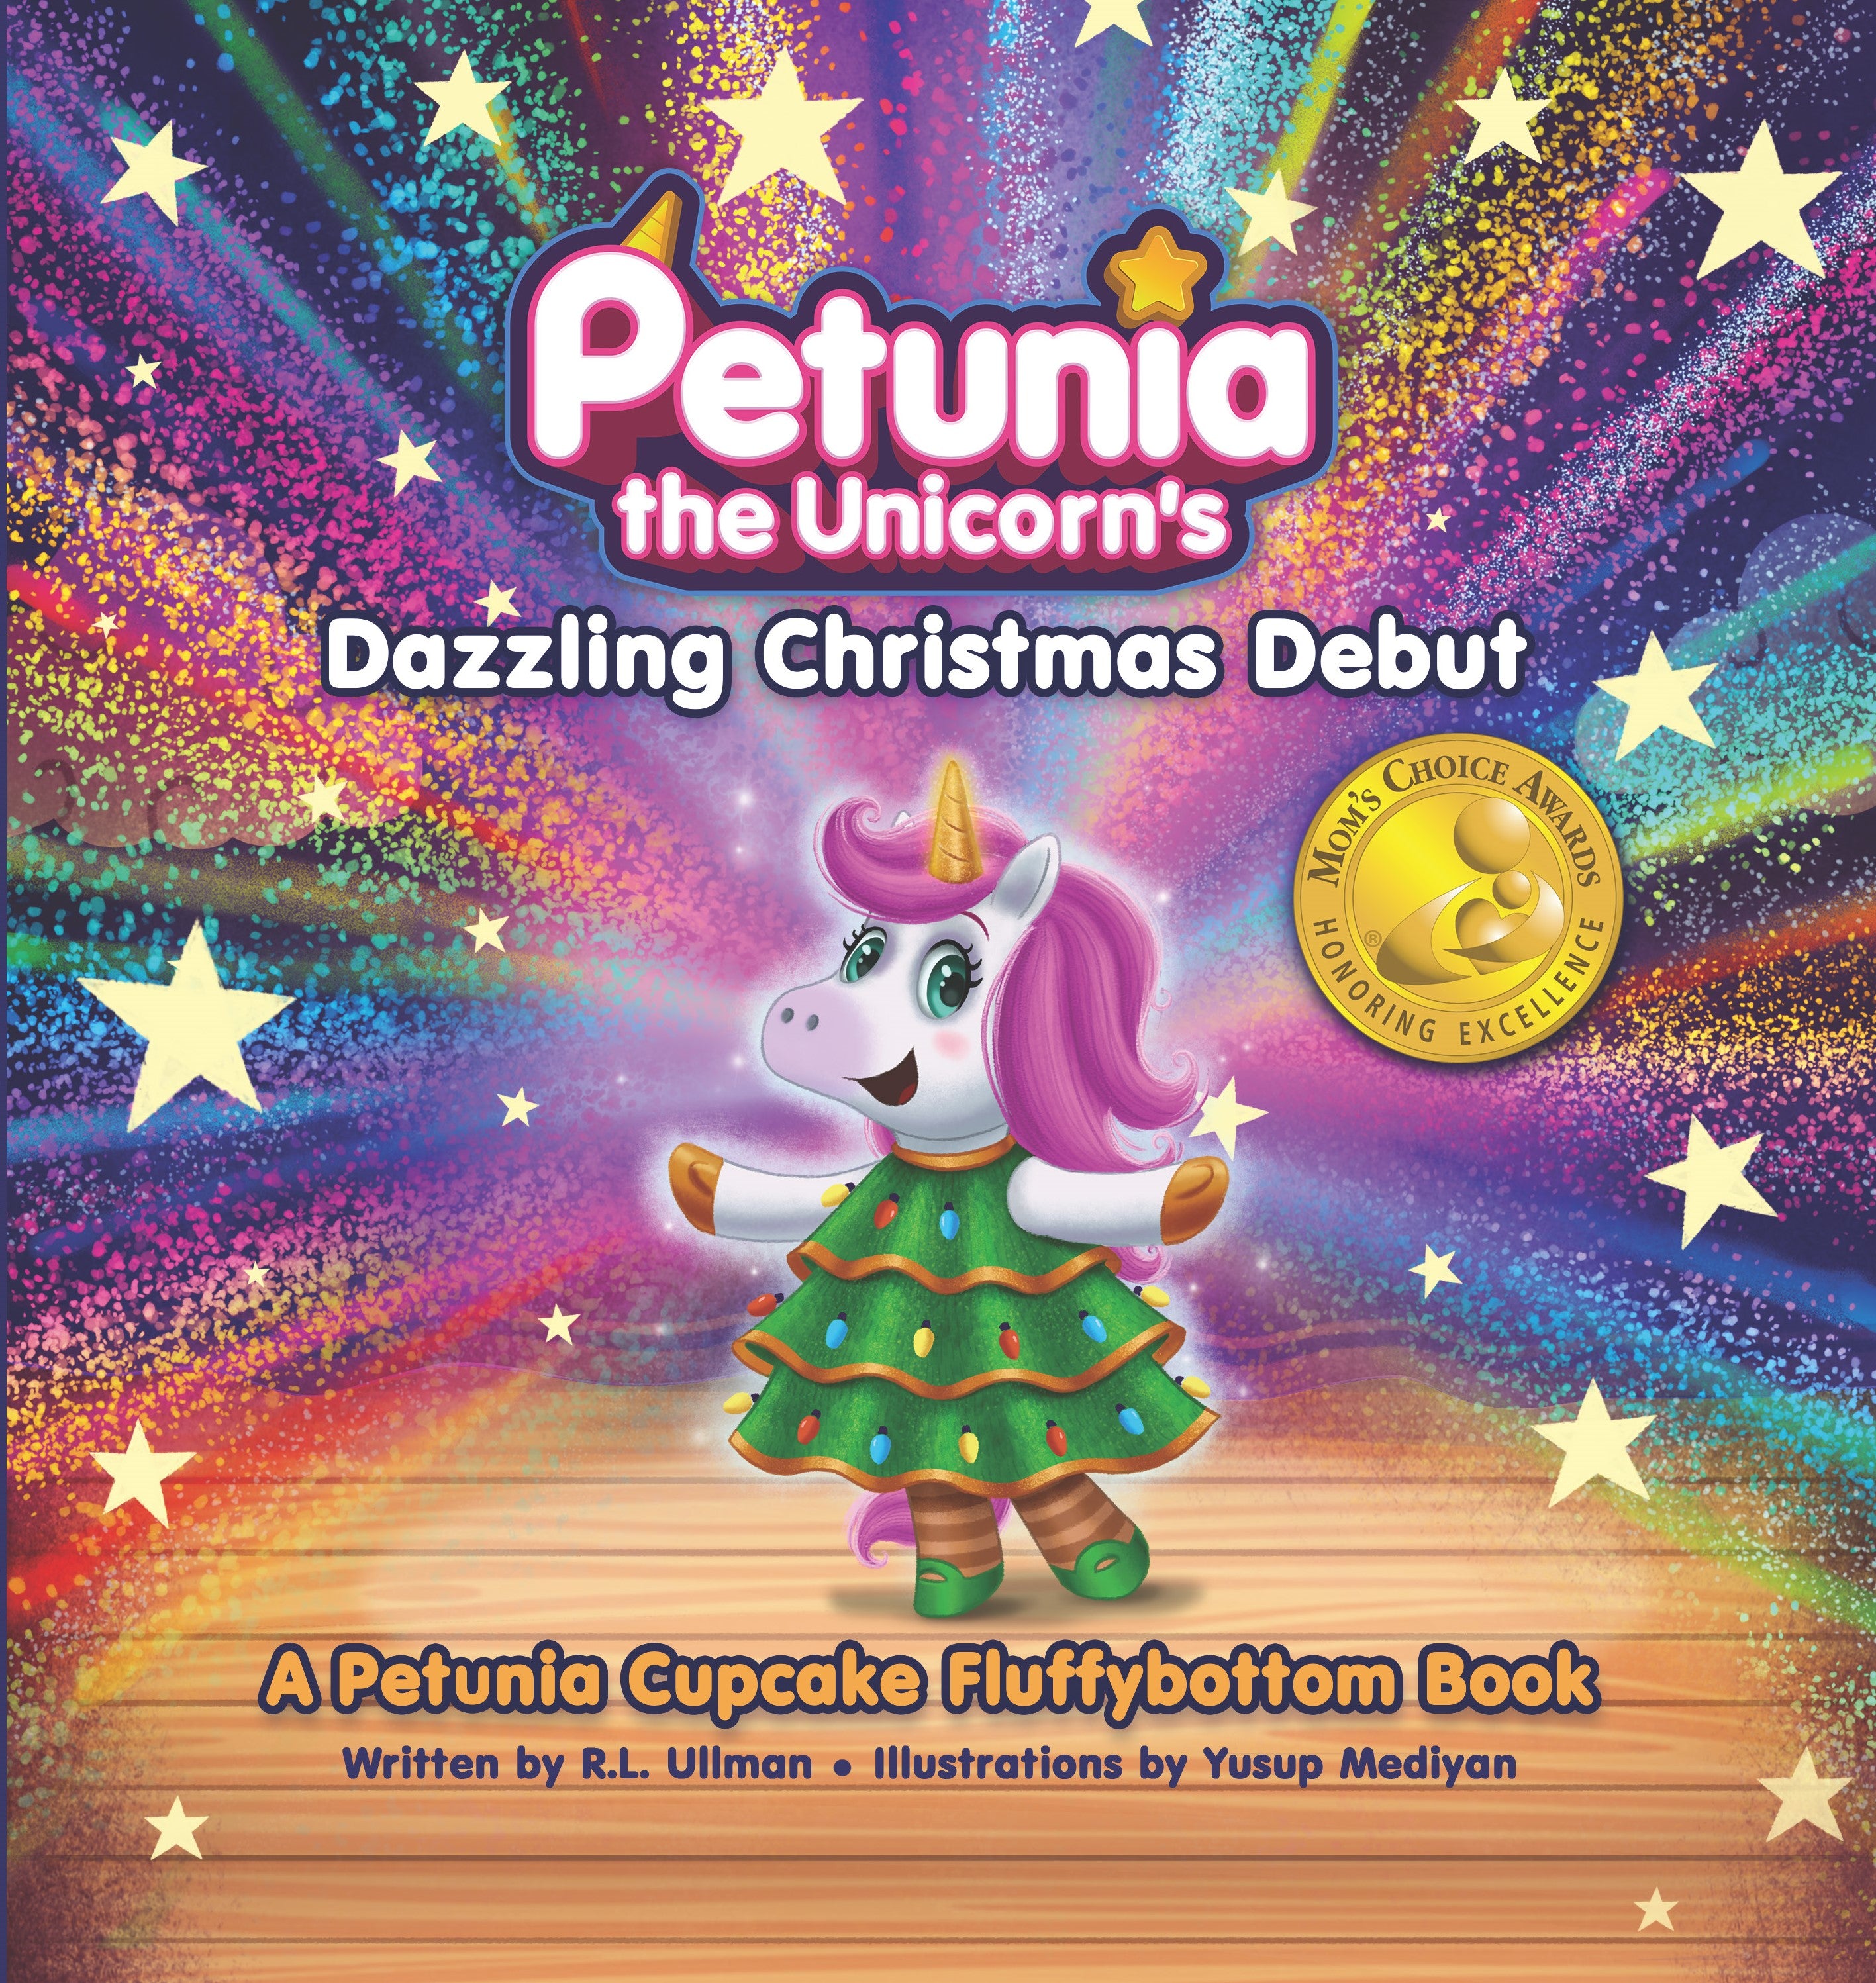 Petunia the Unicorn's Dazzling Christmas Debut (Signed Hardcover)